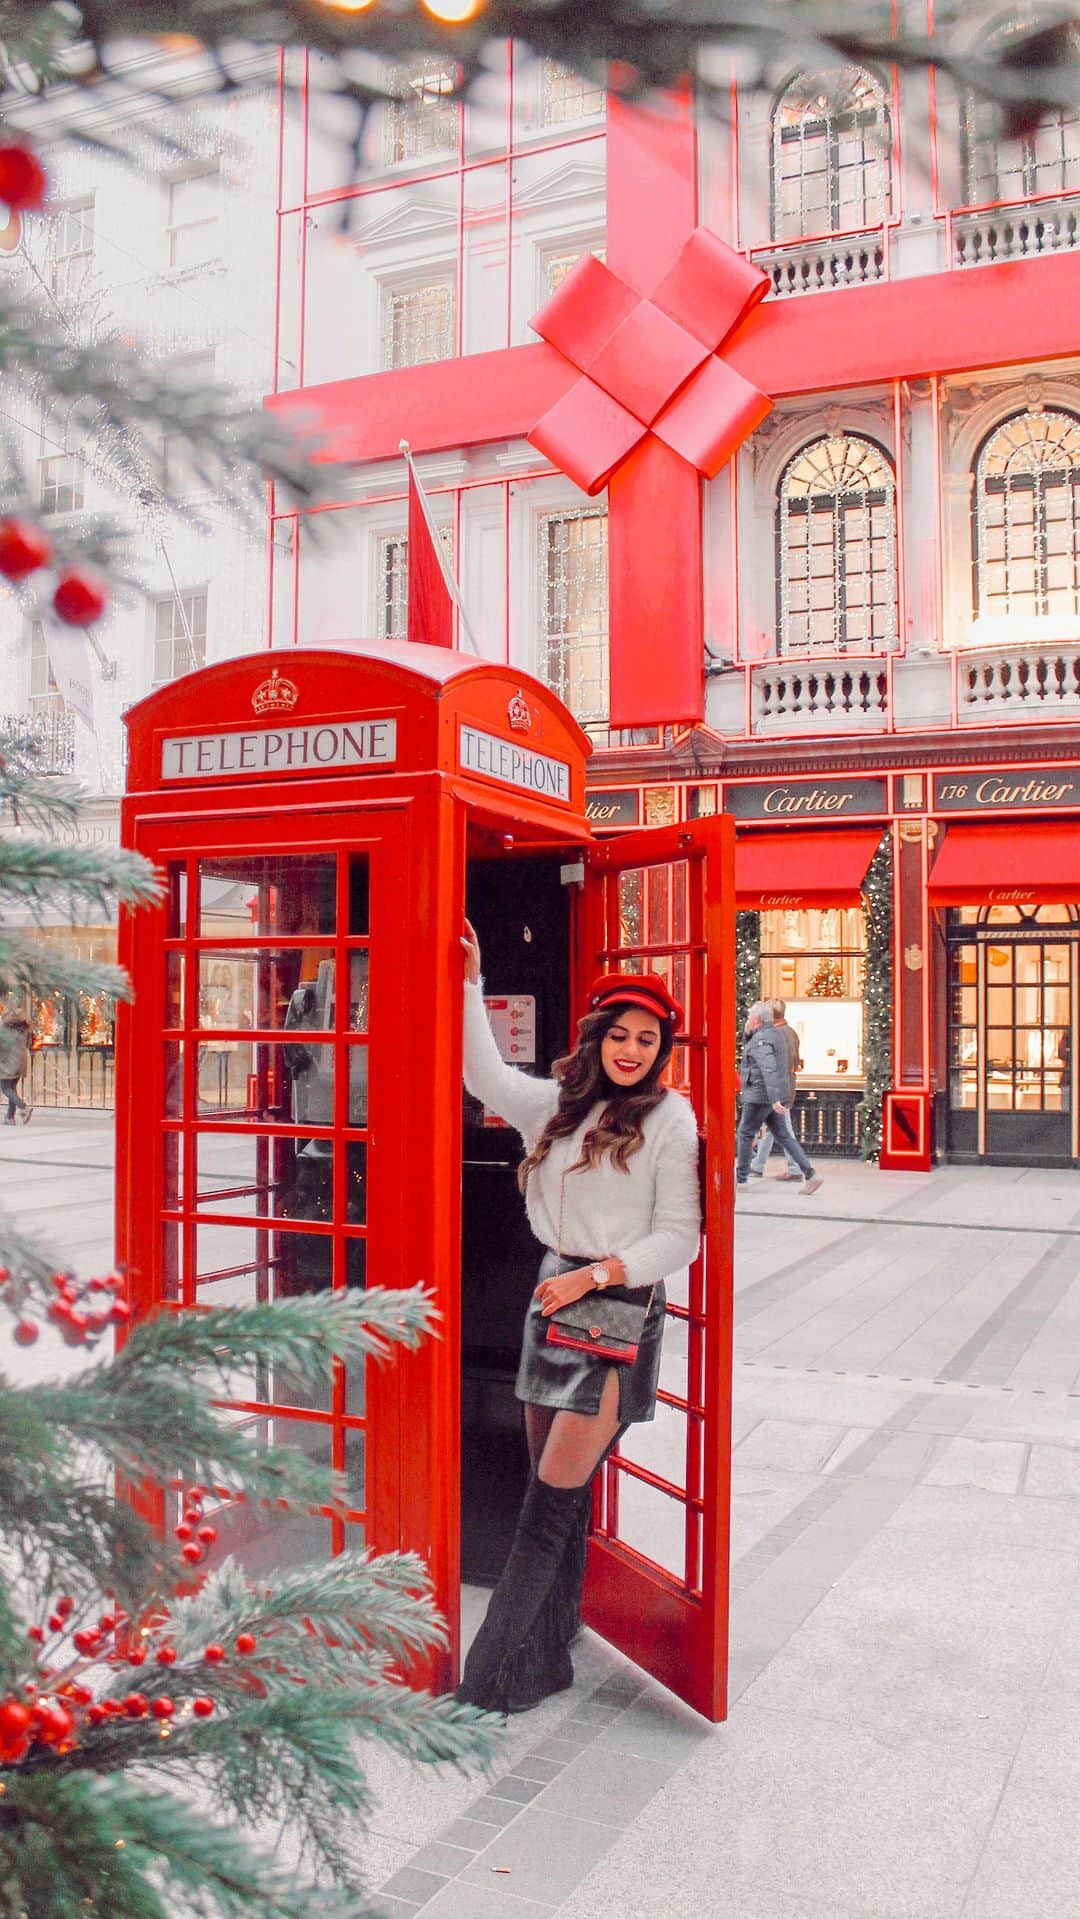 Aakriti Ranaのインスタグラム：「SAVE THIS ❤️  I’ve always loved celebrating Christmas. My parents always made sure to put the socks out and get us presents when we were little. We used to really look forward to it ❤️  If you too love Christmas as much as I do then visit London n December. London looks absolutely gorgeous during this time of the year. The Winter Wonderland, mulled wine and the gorgeous Christmas installations have my heart!  Here are some of the best places you can visit in London for Christmas for an unforgettable Christmas experience and beautiful pictures 🎄   Regent Street & Oxford street Covent Garden  Winter Wonderland Maddox Gallery Ede and Ravenscroft Harrods Peggy Porschen Carnaby Street Annabels Somerset House  Kew Gardens   Can you add anything more to this list?  Who would you go here with? ❤️  [ Aakriti Rana, London, Christmas, Winter Wonderland, Christmas in London, Travel Blogger ]」